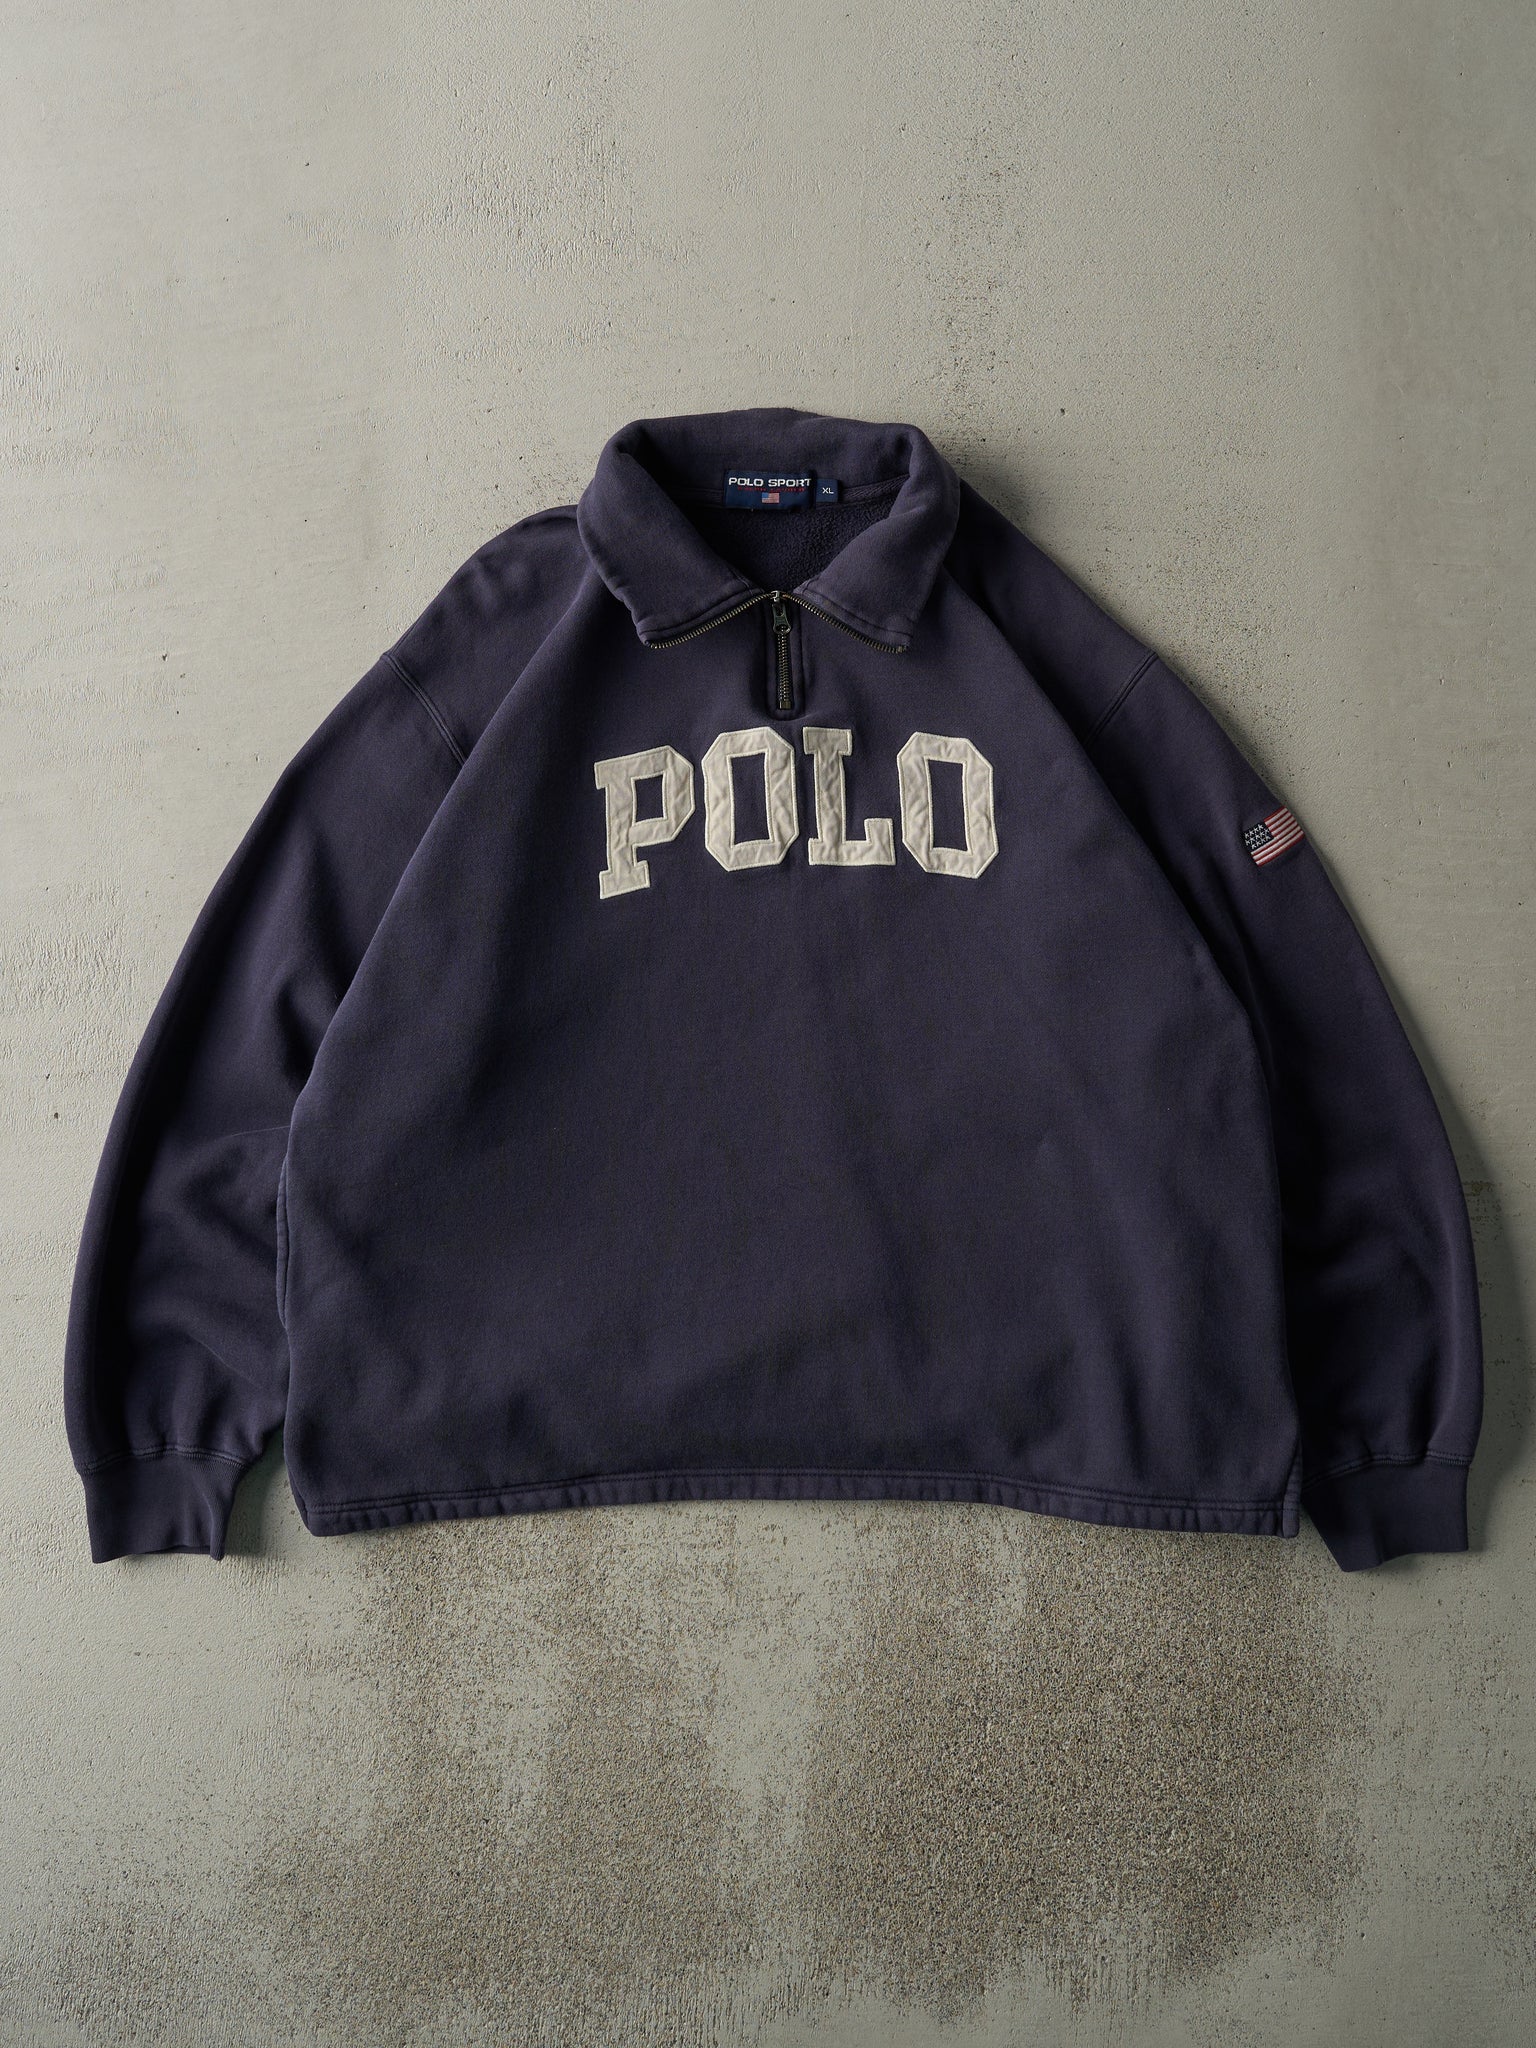 Vintage 90s Navy Blue Polo by Ralph Lauren Embroidered Quarter Zip Sweater (XL)